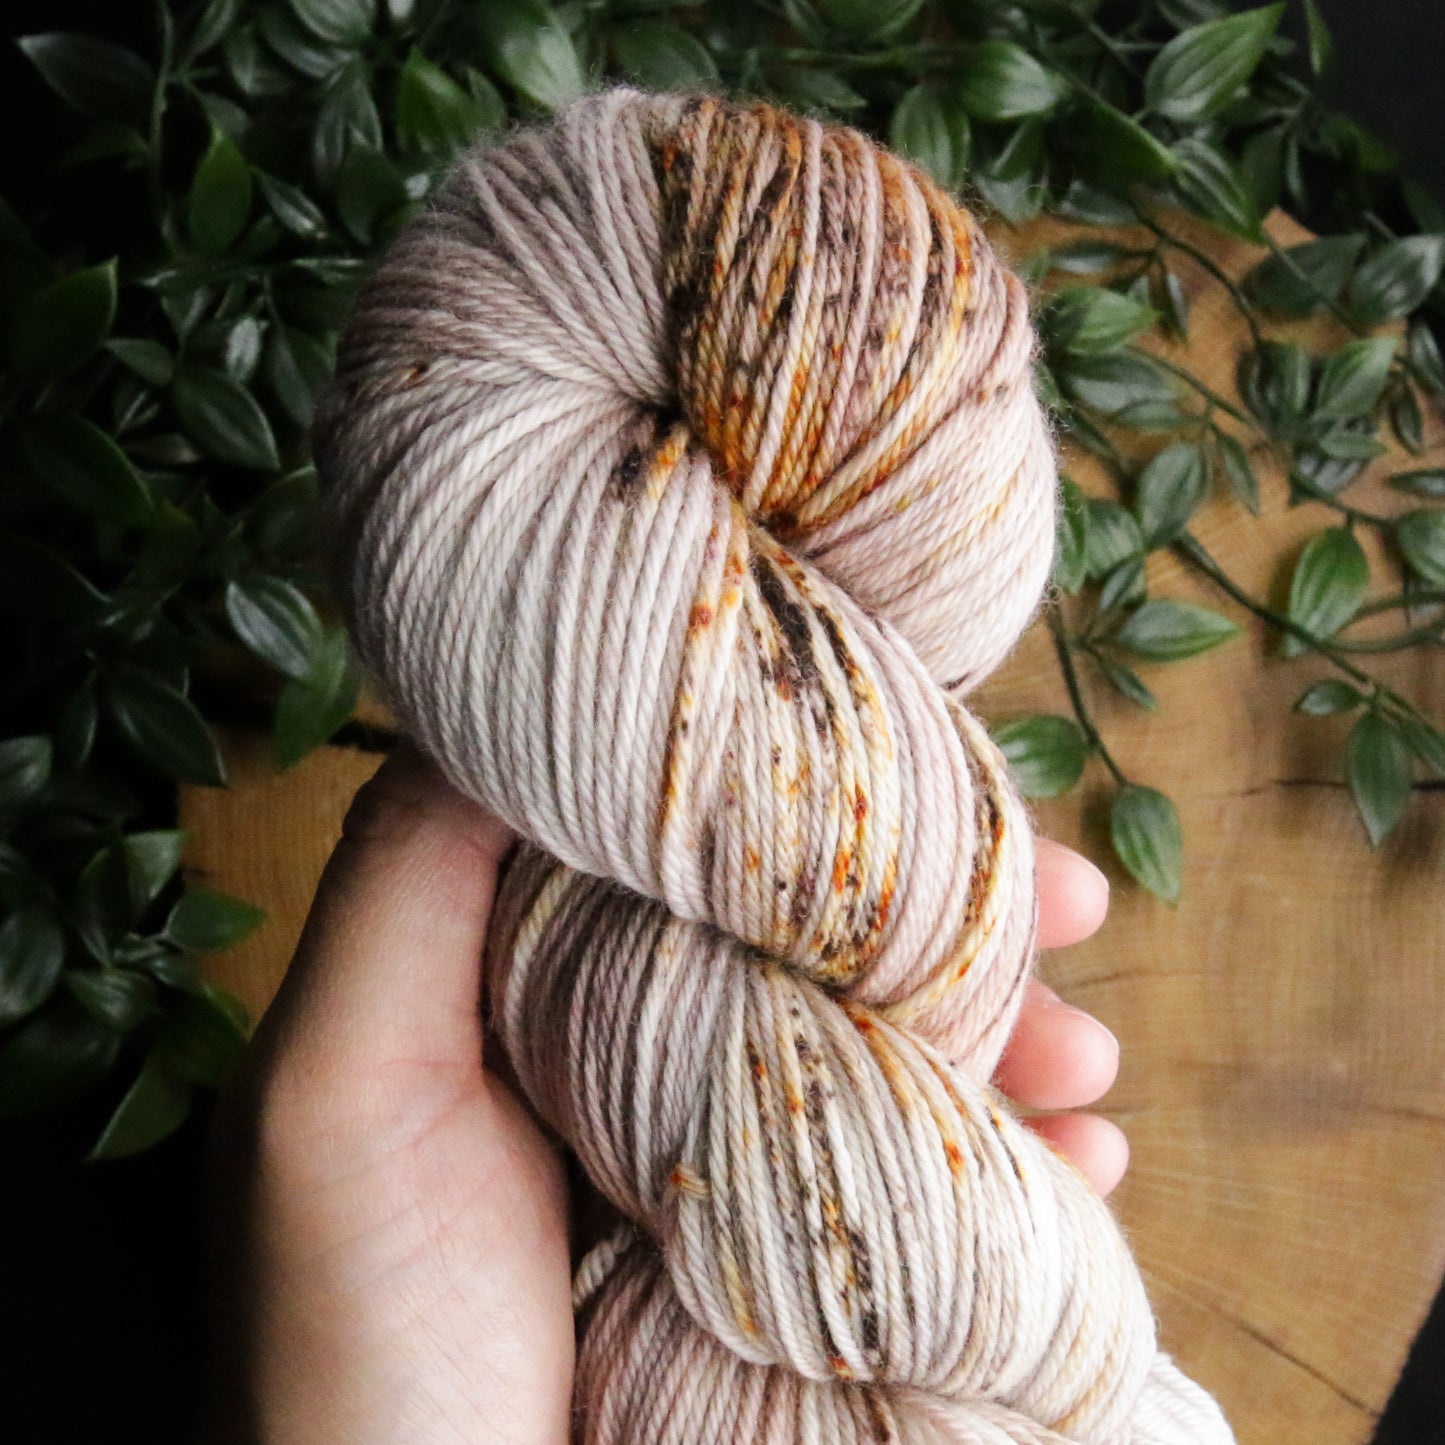 One of a Kind - Merino Squish - Sport Weight